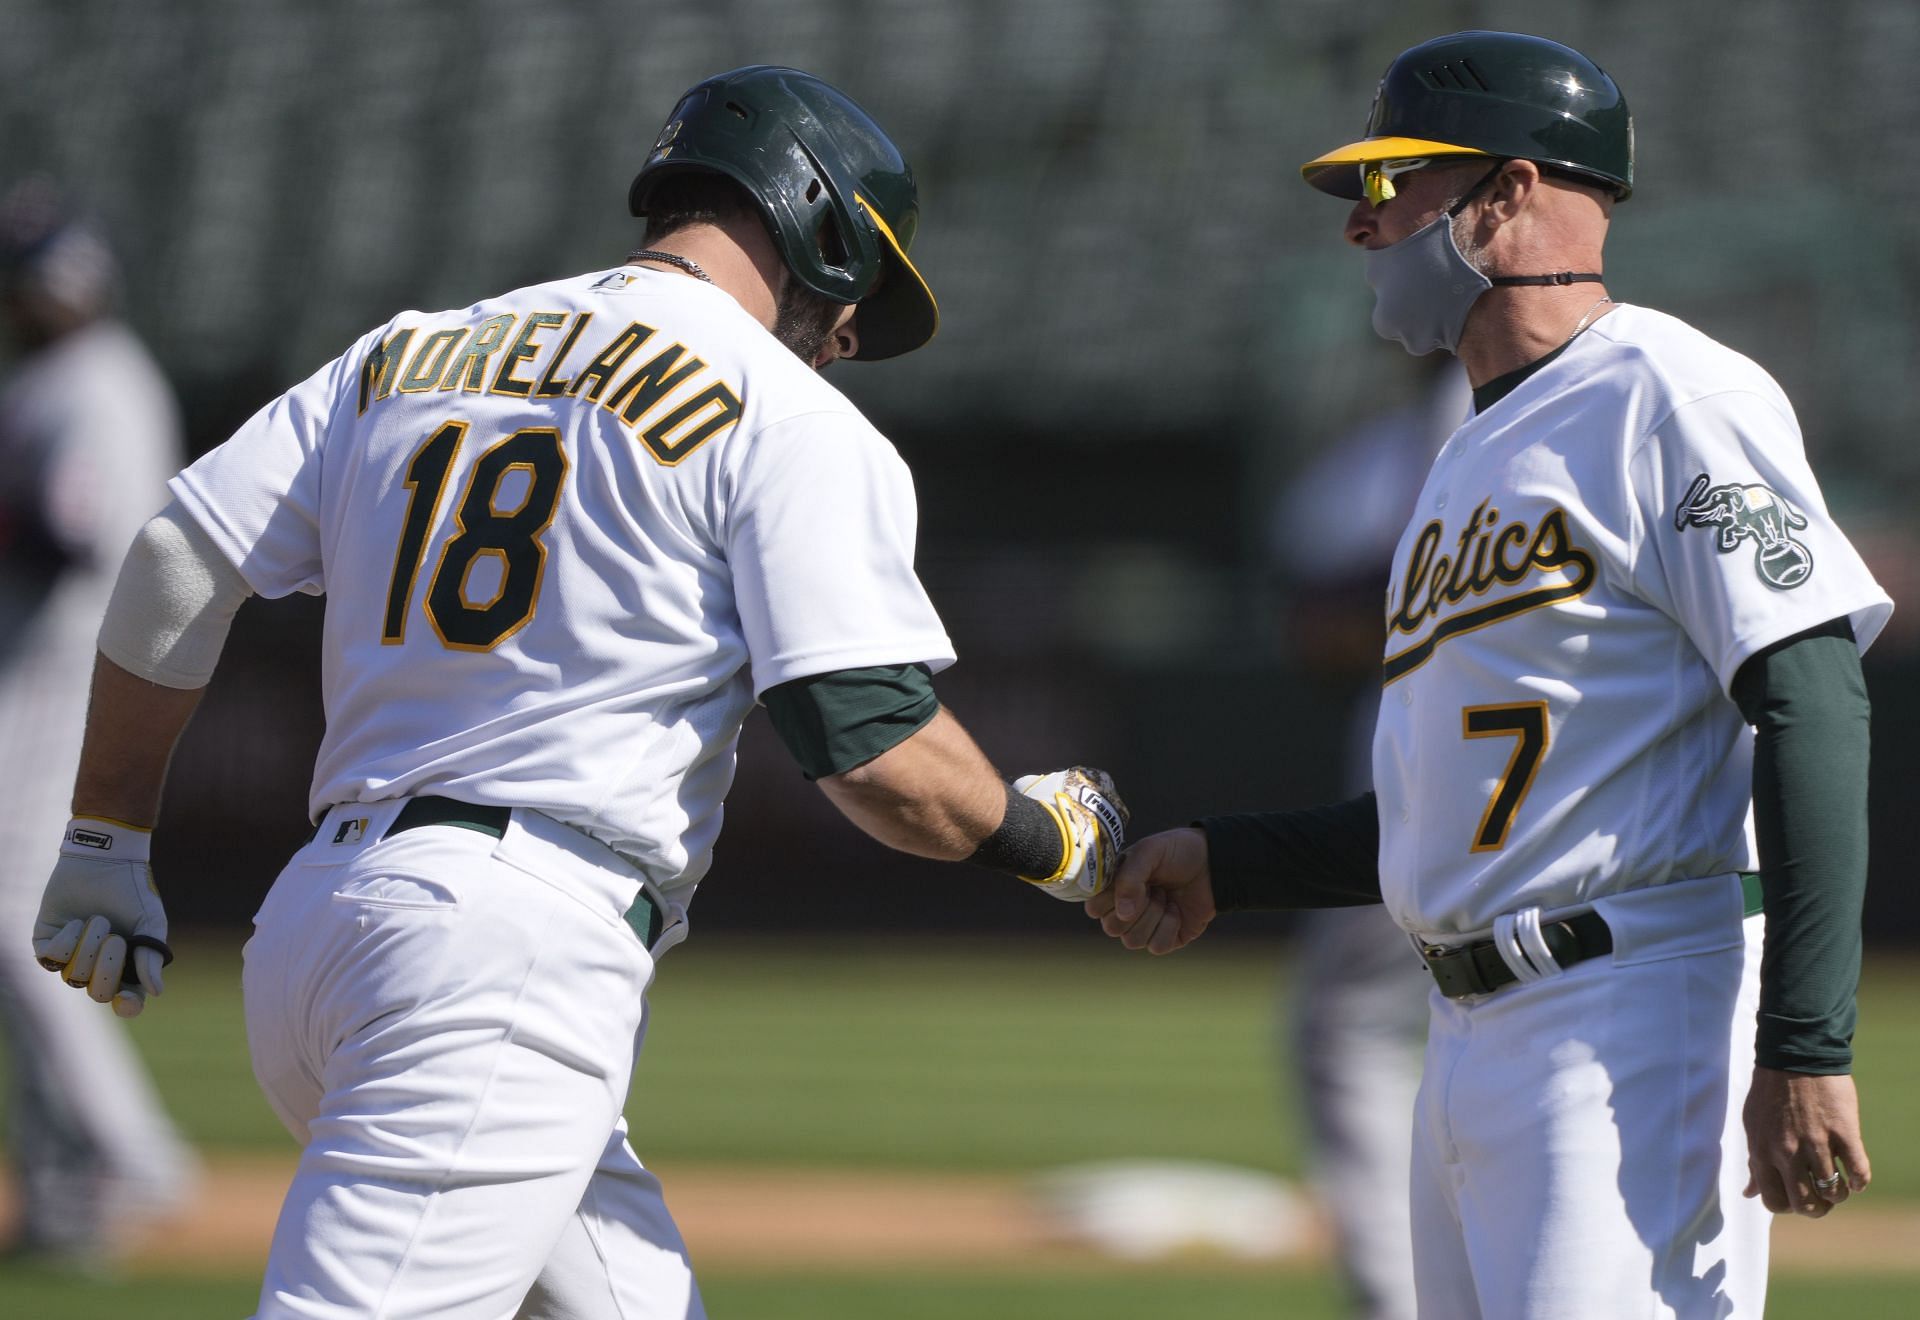 Mitch Moreland of the Oakland Athletics is congratulated by coach Mark Kotsay during a game at RingCentral Coliseum